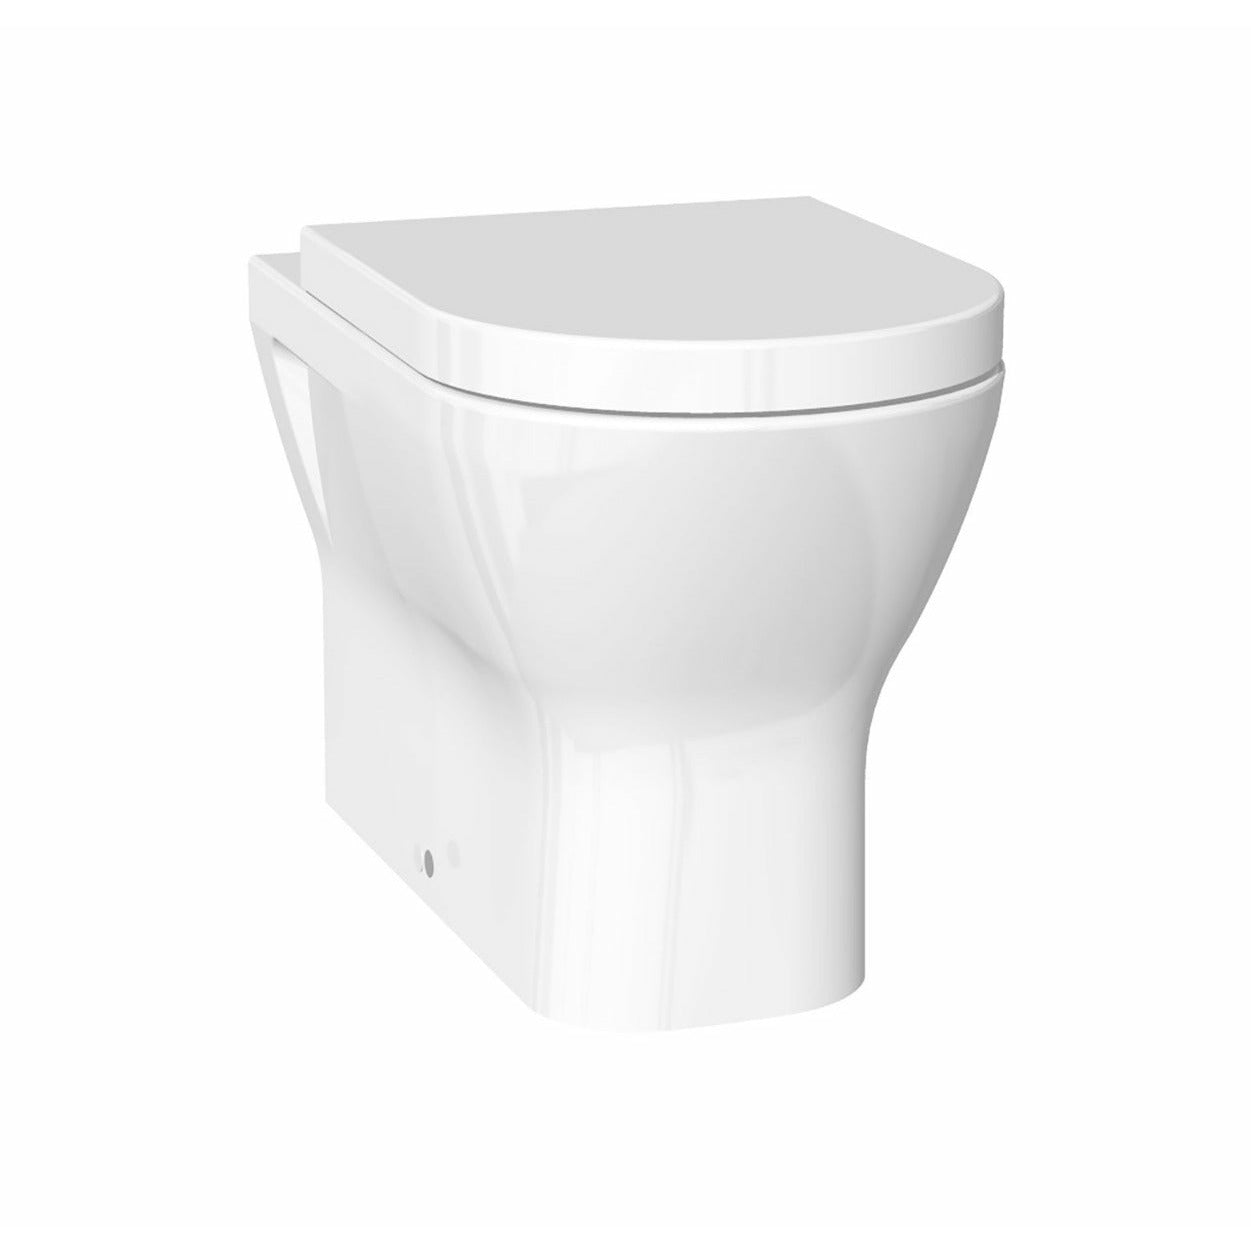 Frontline Resort Back-to-Wall Toilet with Soft-Close Seat - Letta London - 